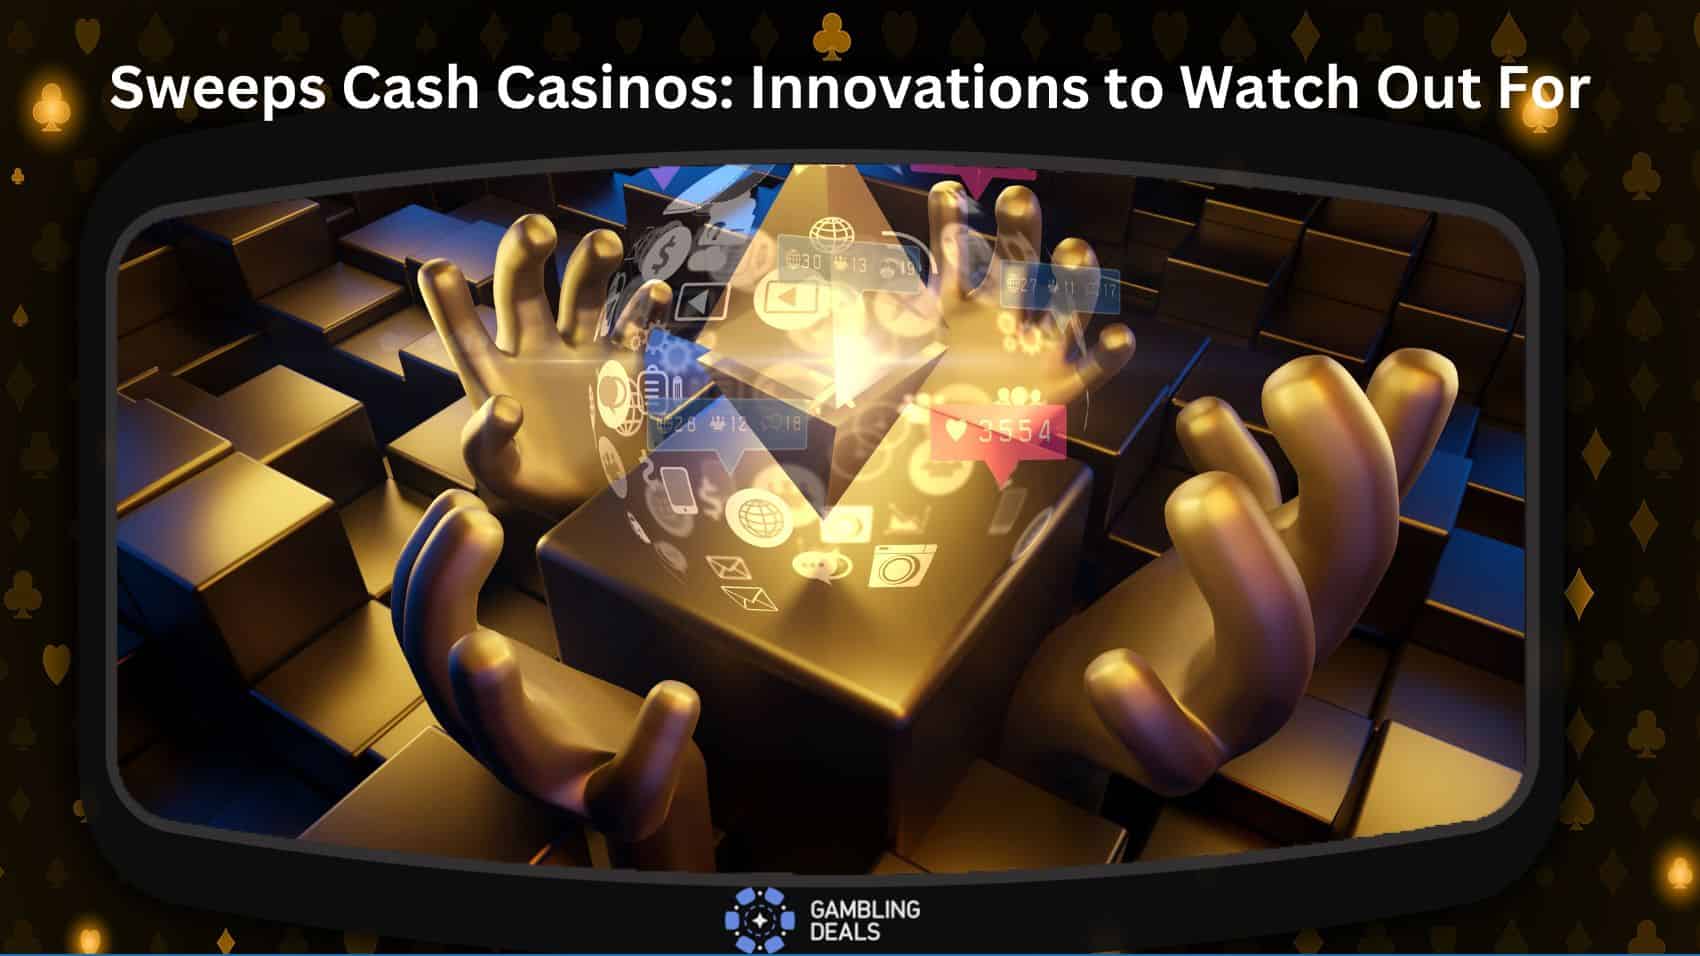 Sweeps Cash Casinos Trends and Innovations to Watch Out For